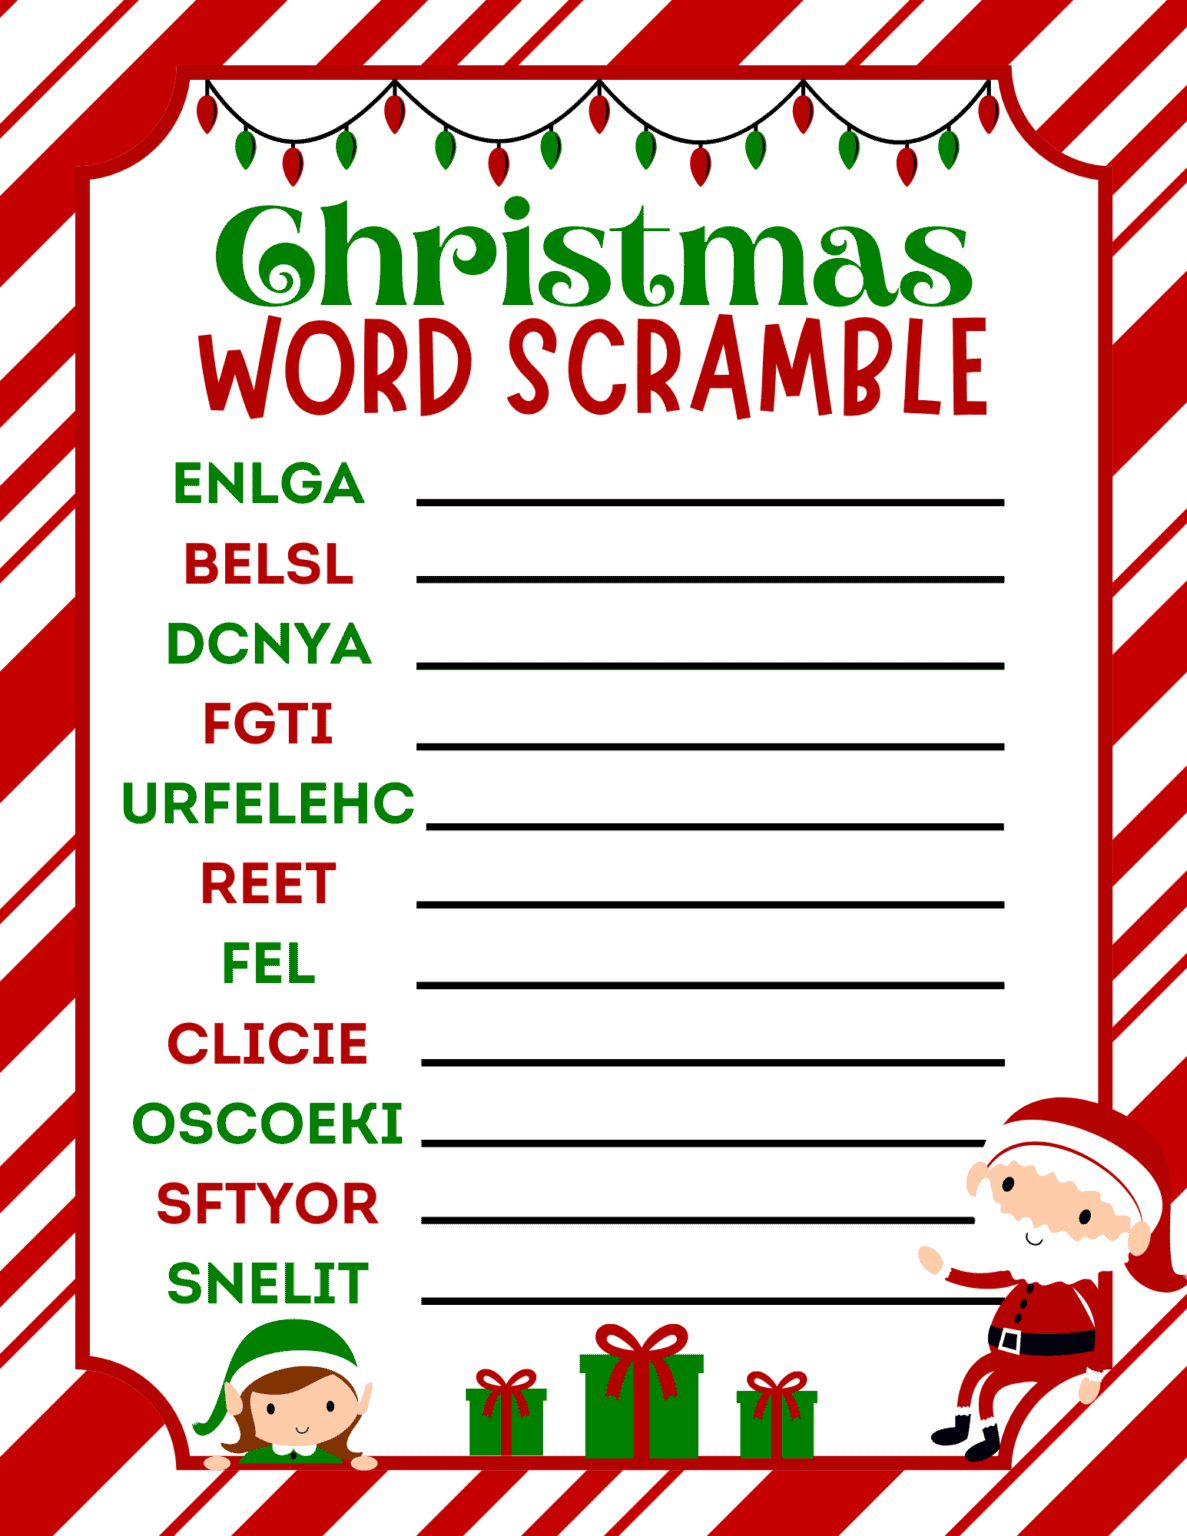 Free Printable Christmas Word Scramble for Kids - Prudent Penny Pincher